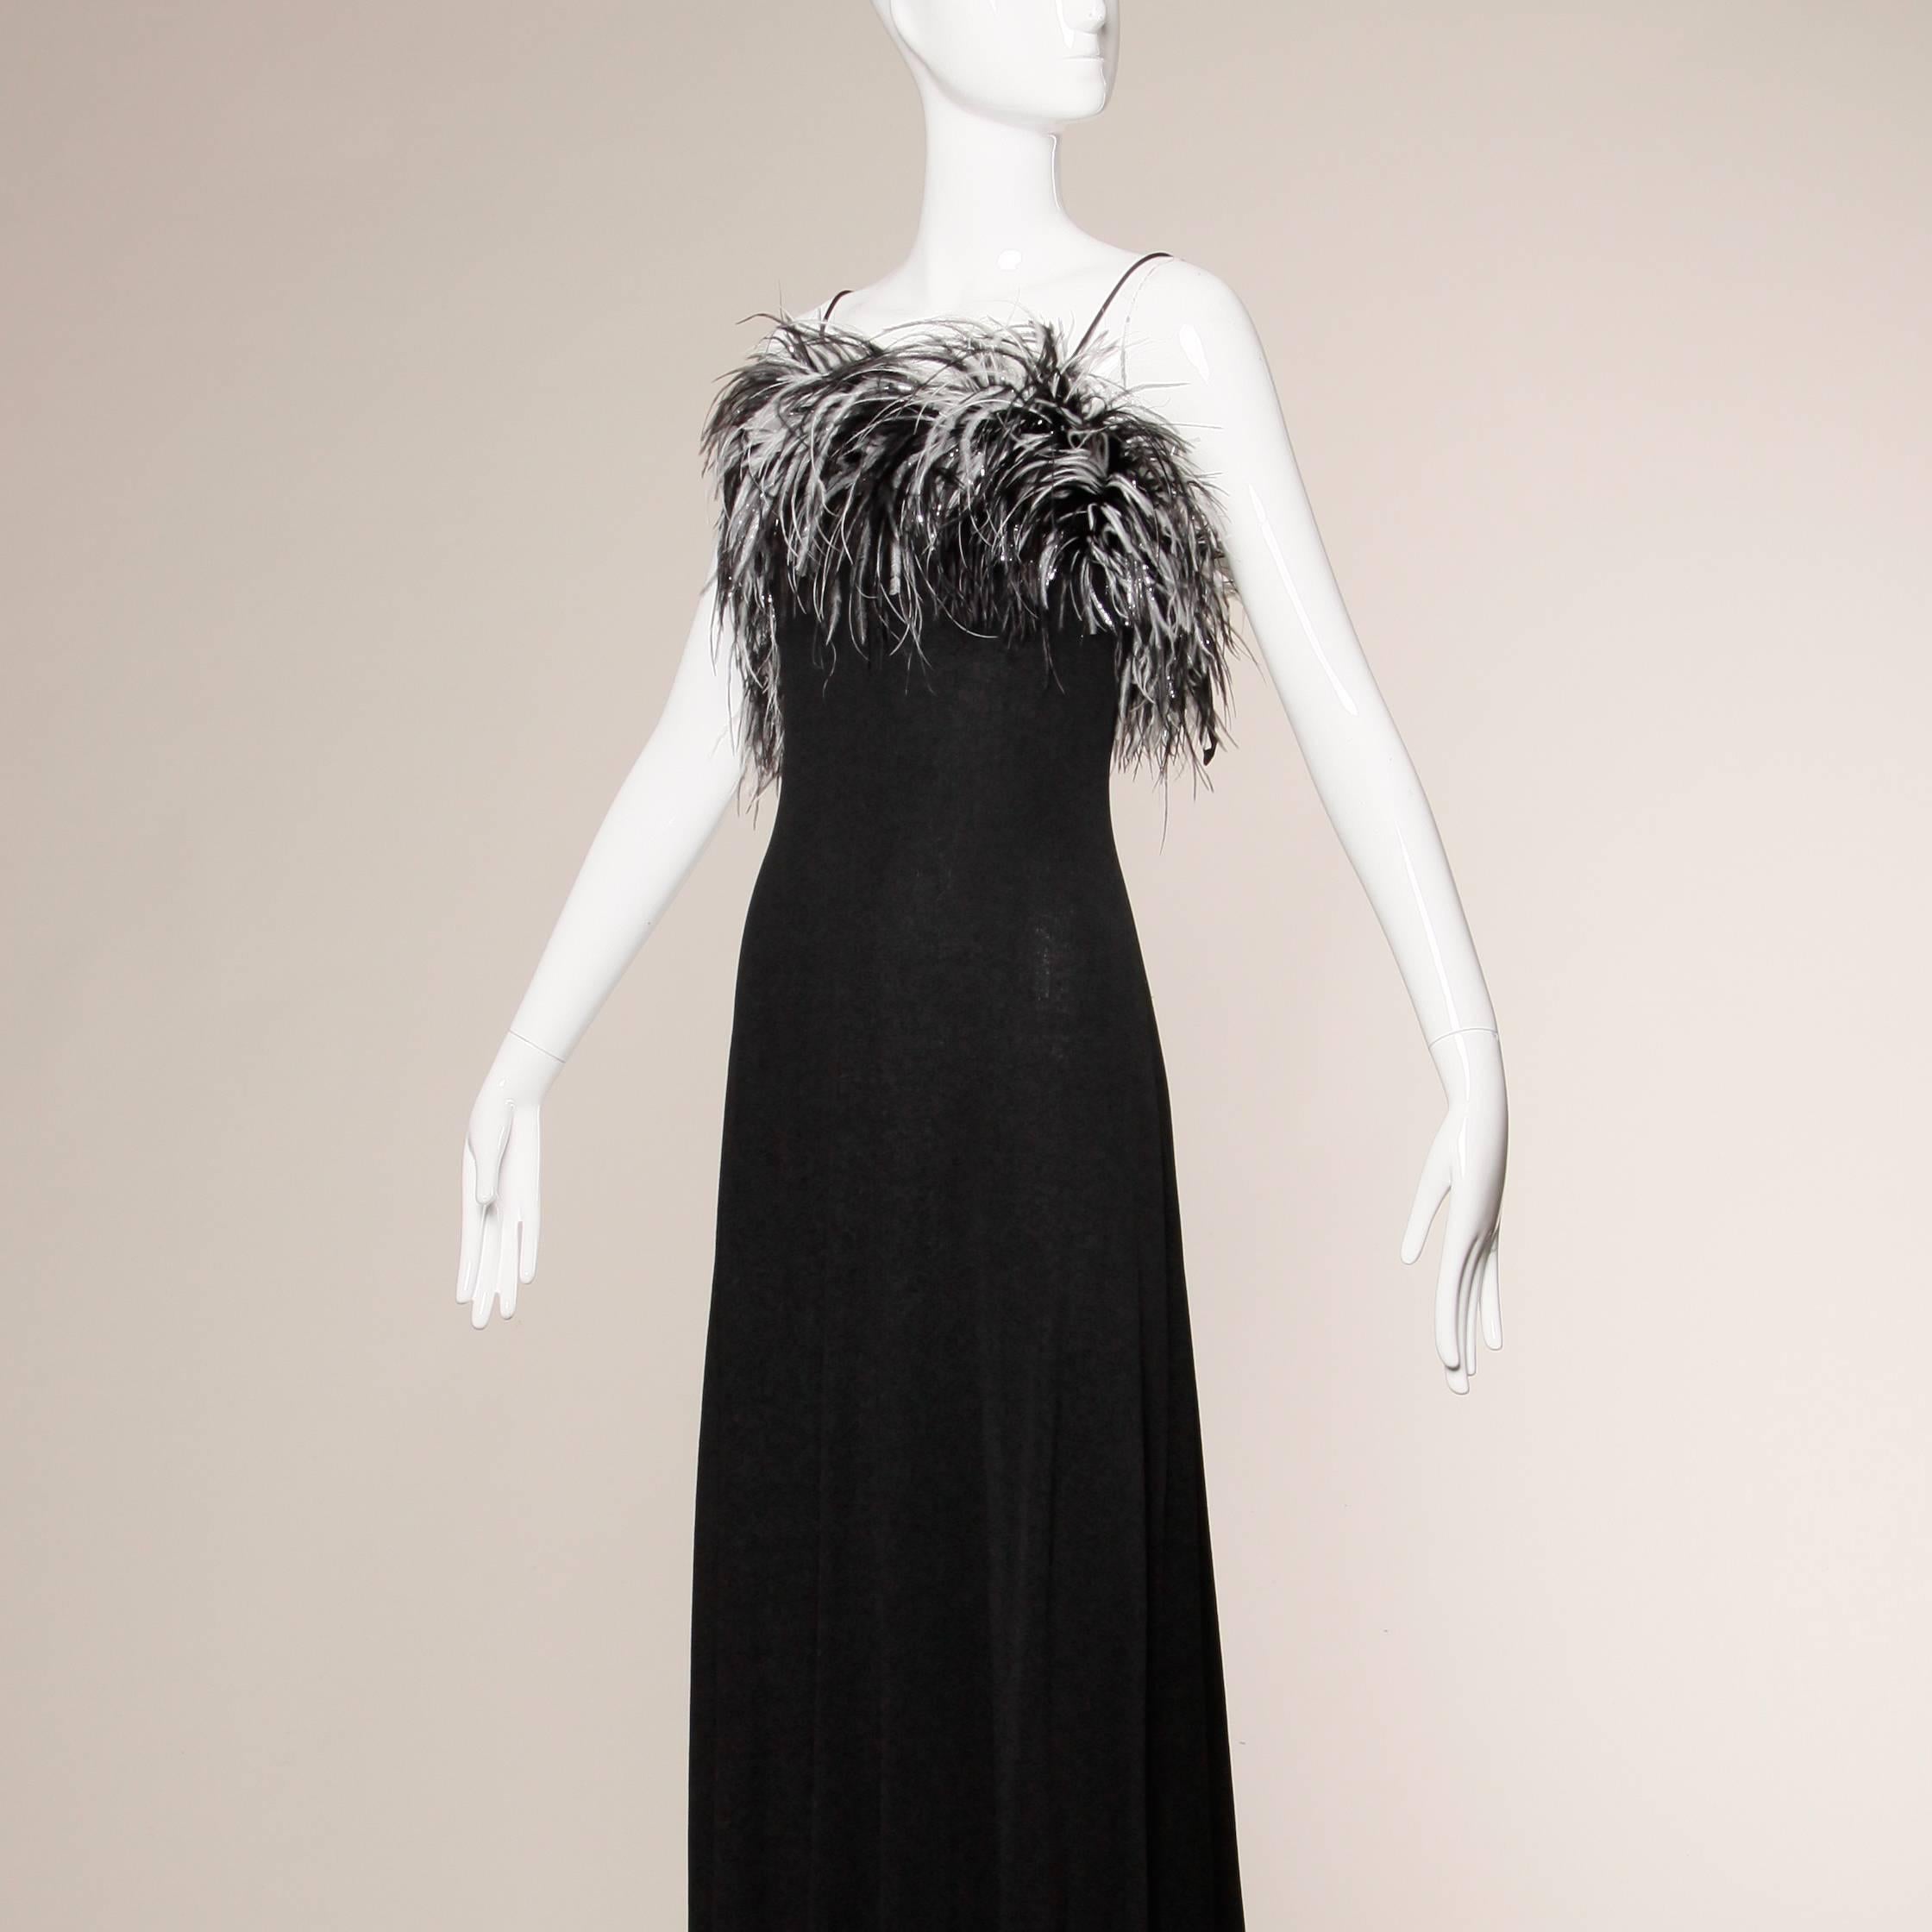 Black 1970s Vintage Jersey Knit Maxi Dress with Metallic Ostrich Feathers